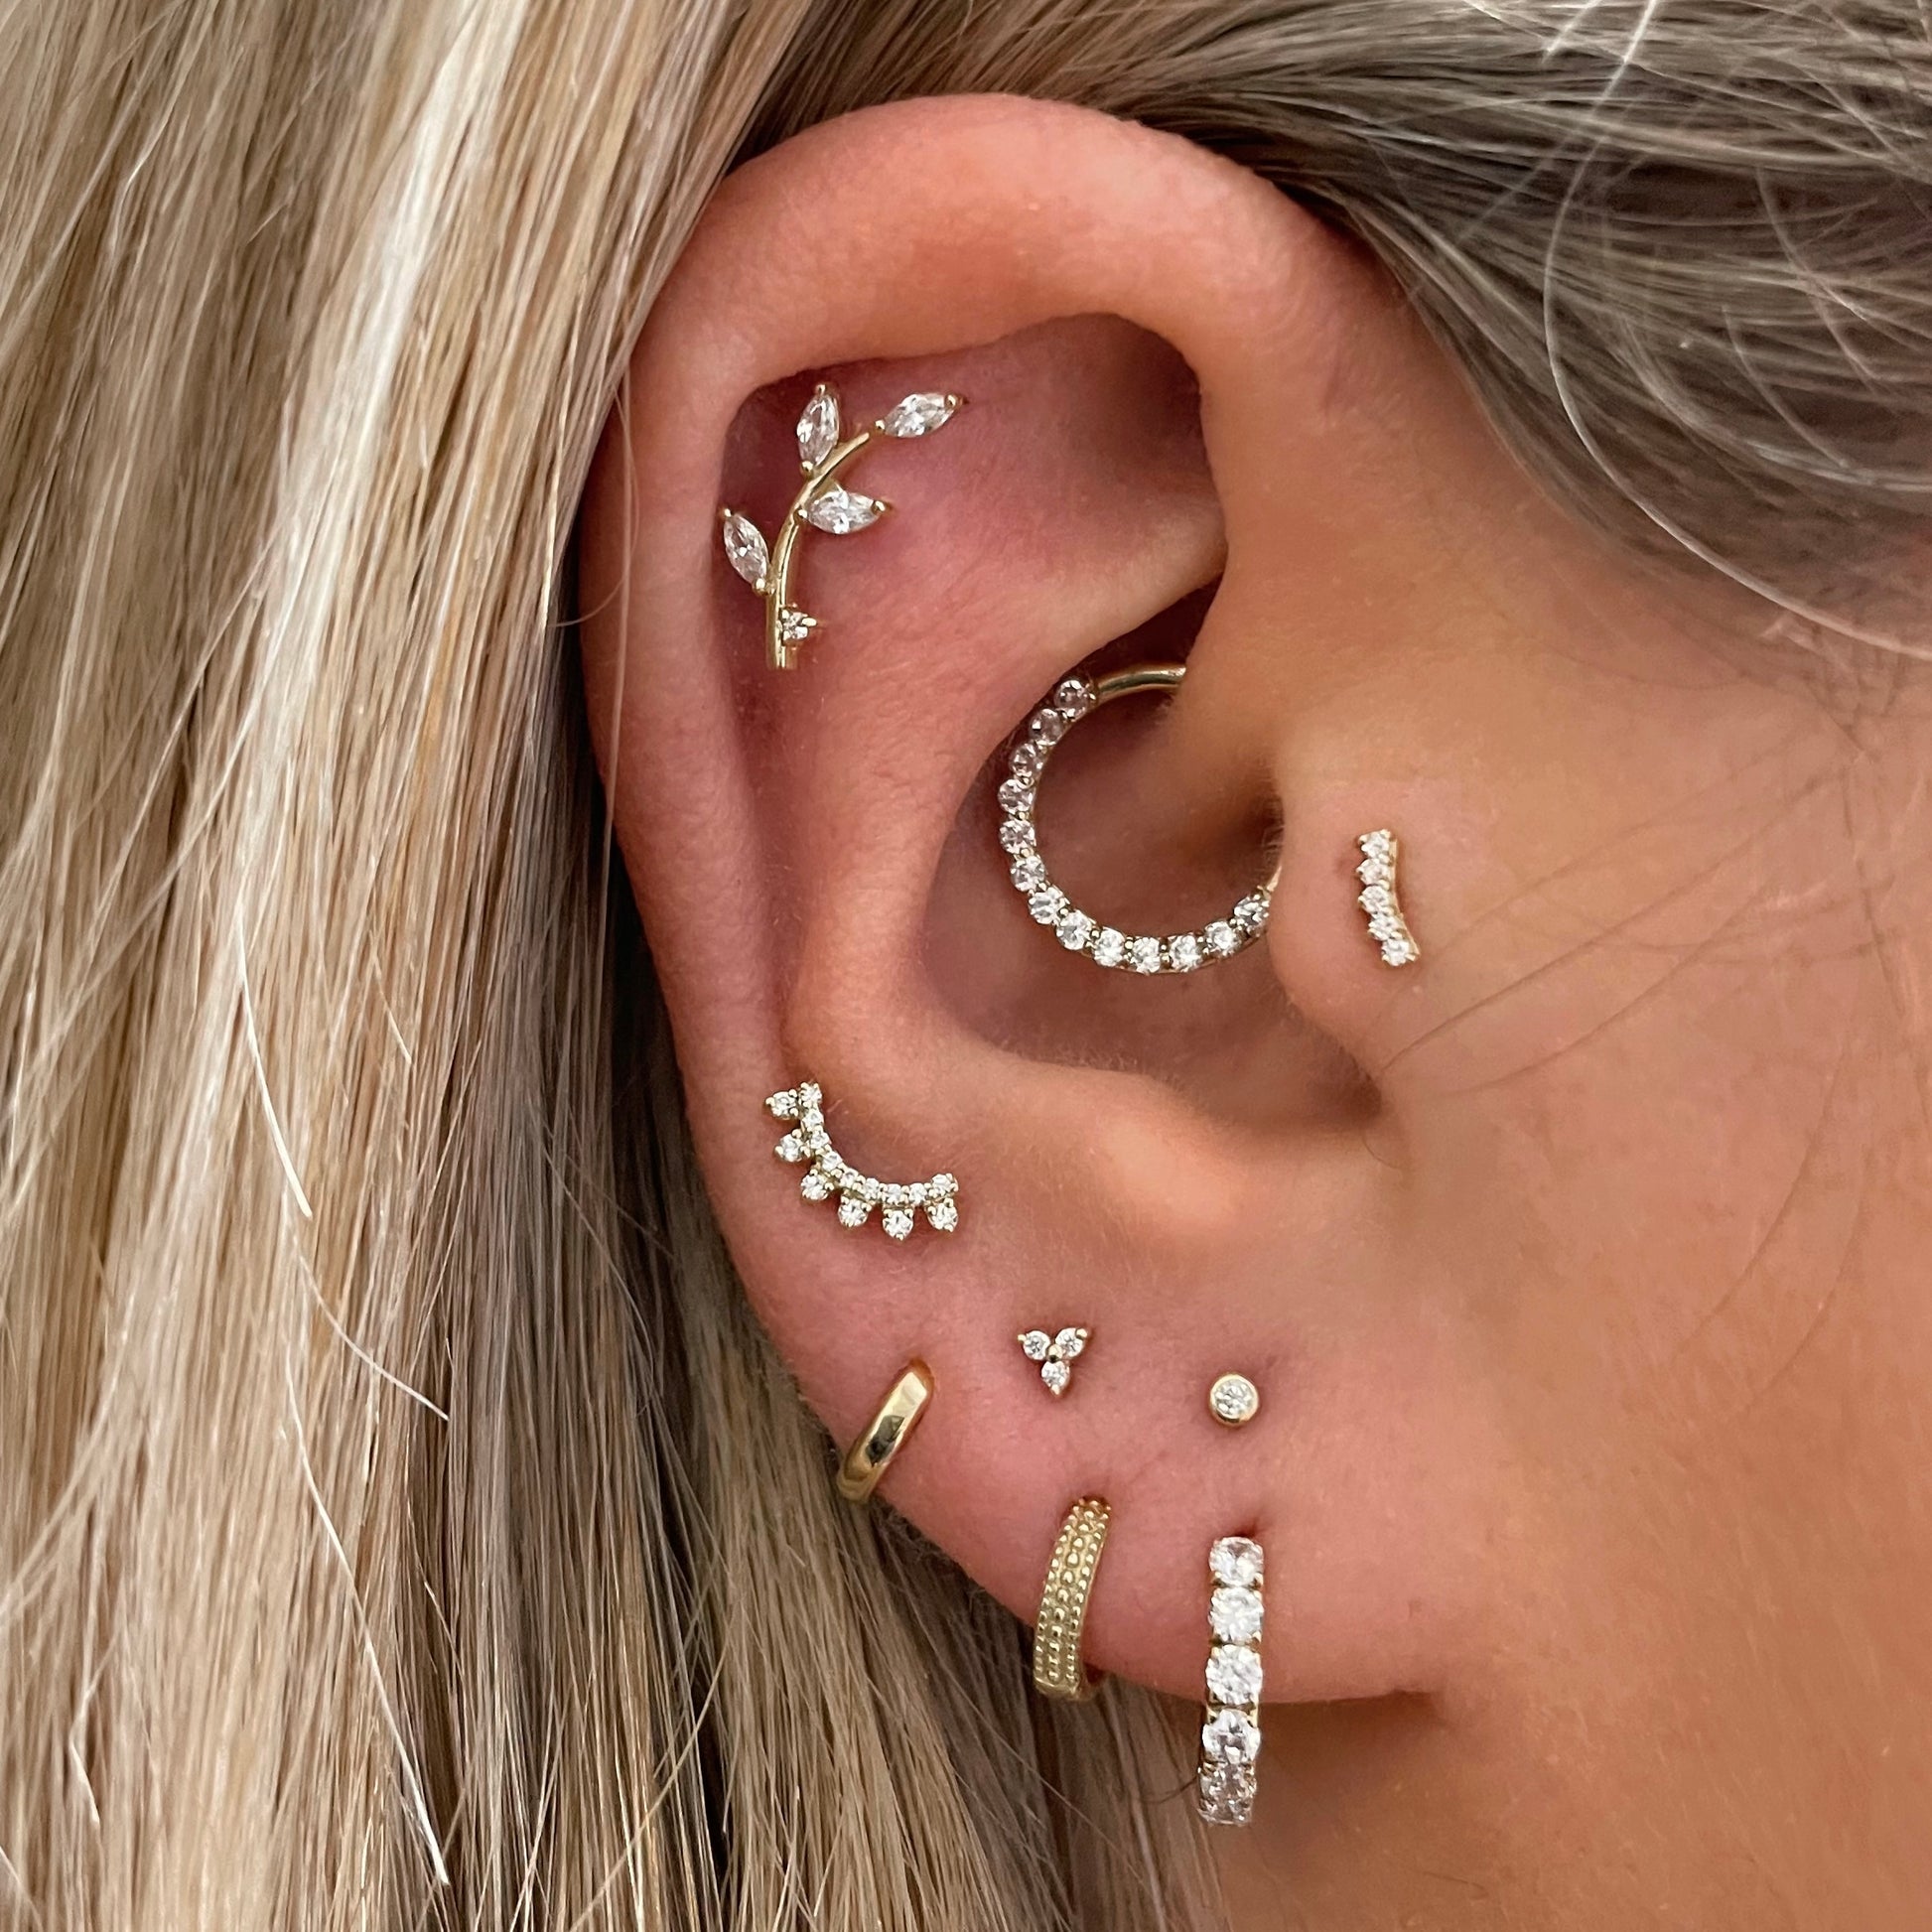 Everything you need to know about tragus piercings – Laura Bond